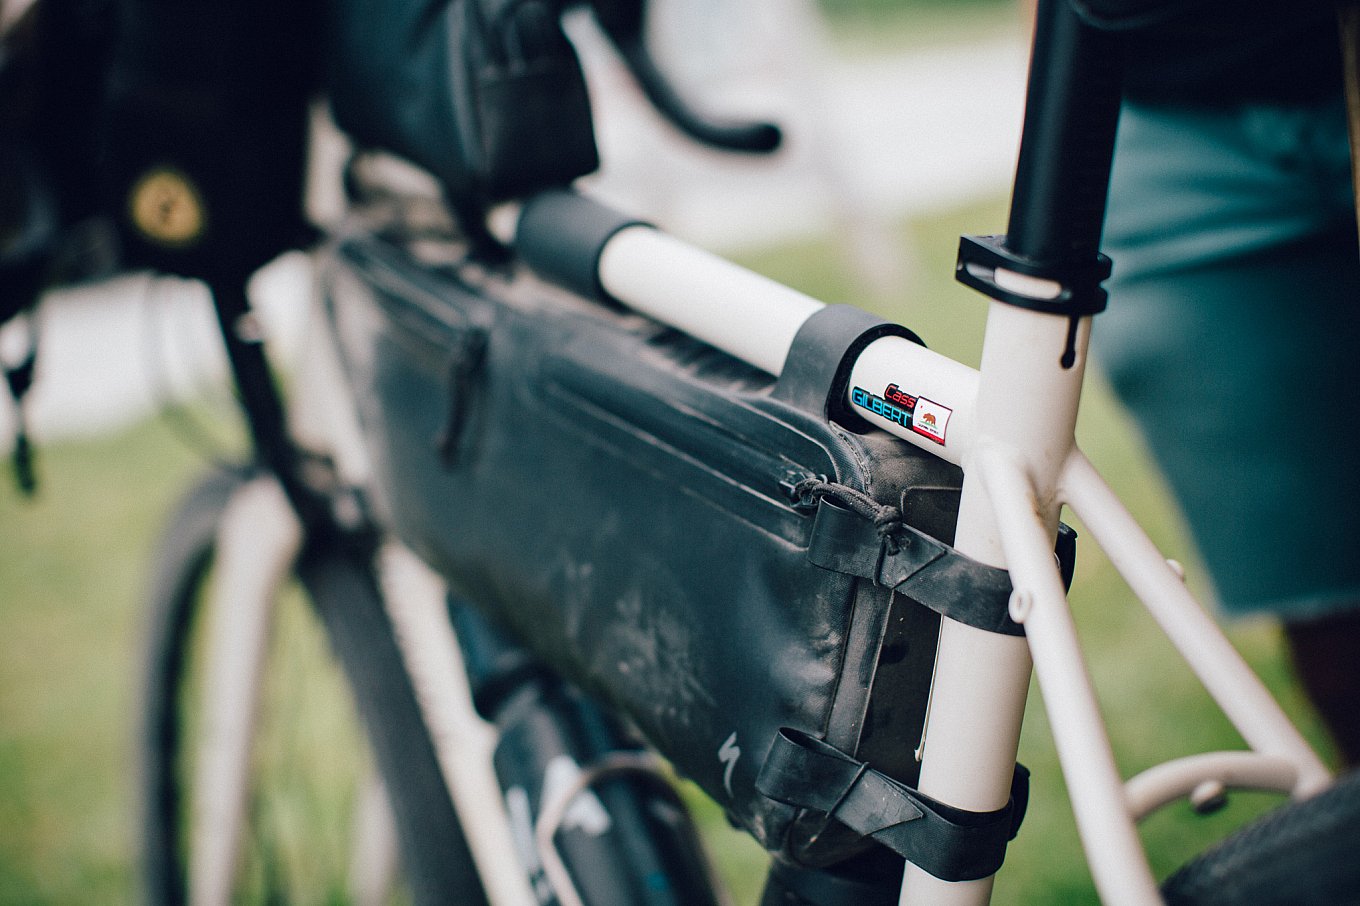 The Burra Burra Bikepacking Bags By Specialized - Gessato